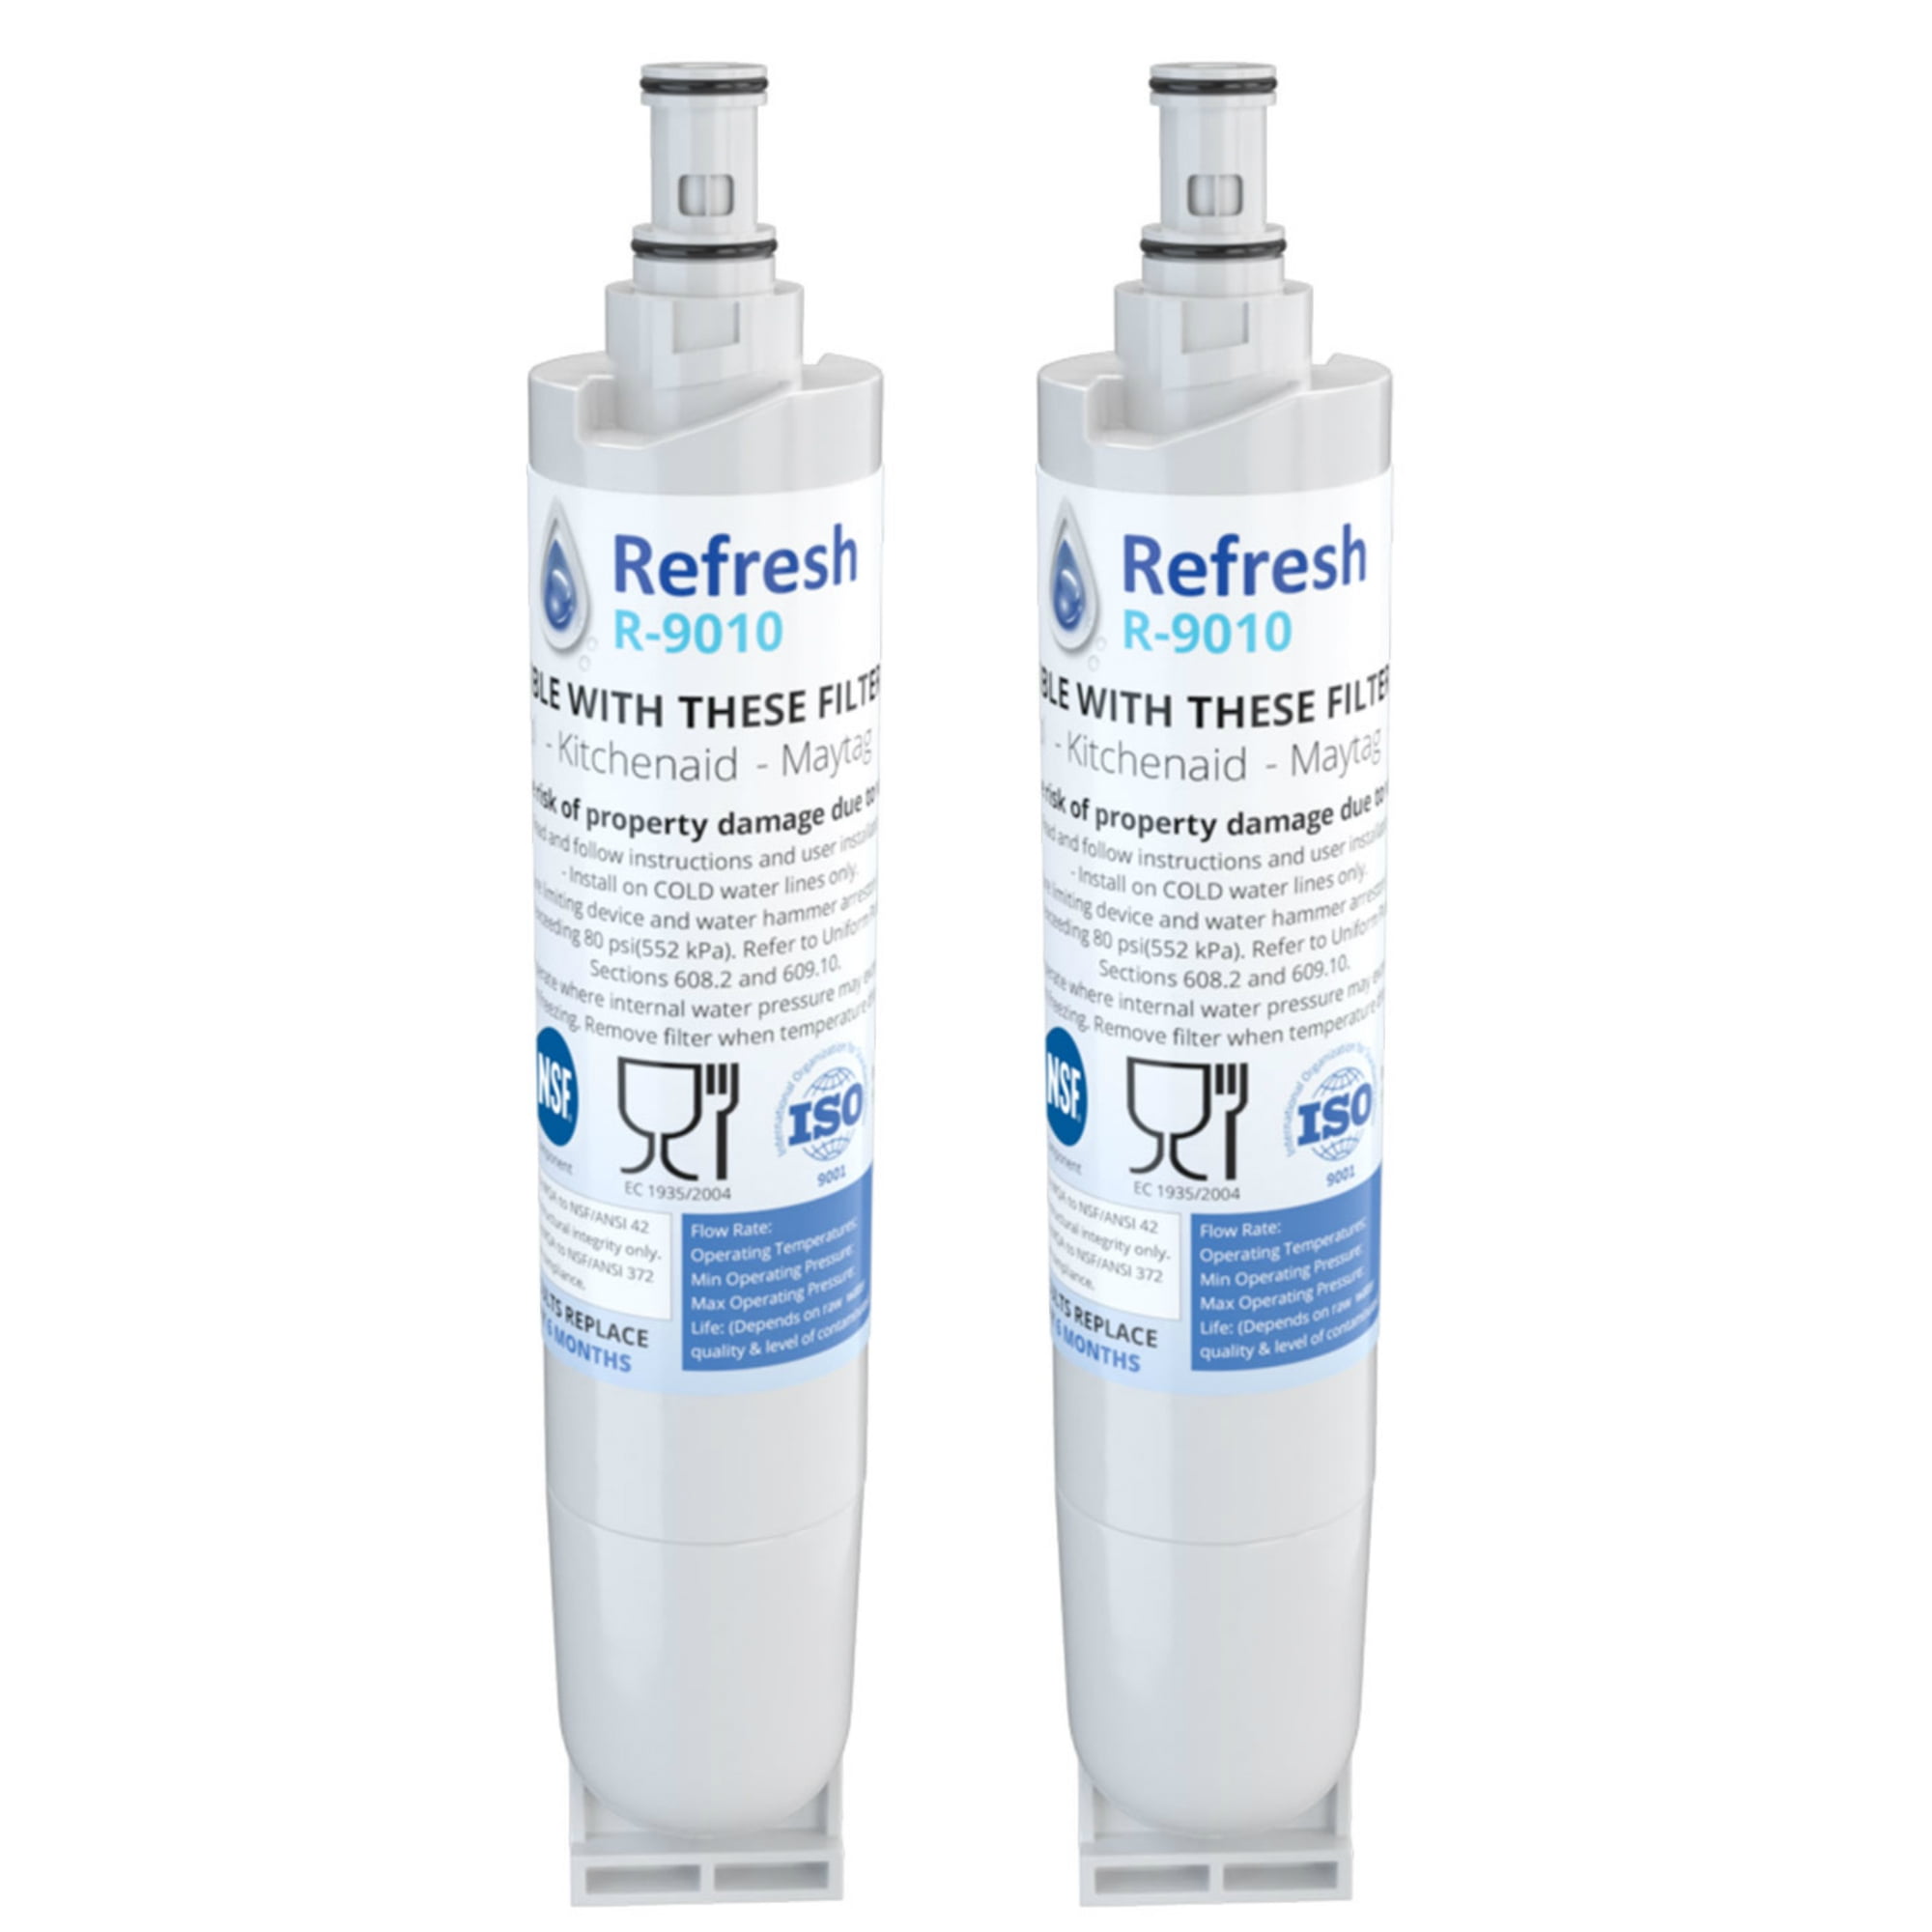 ReplacementBrand RB-W1 Refrigerator Water Filter